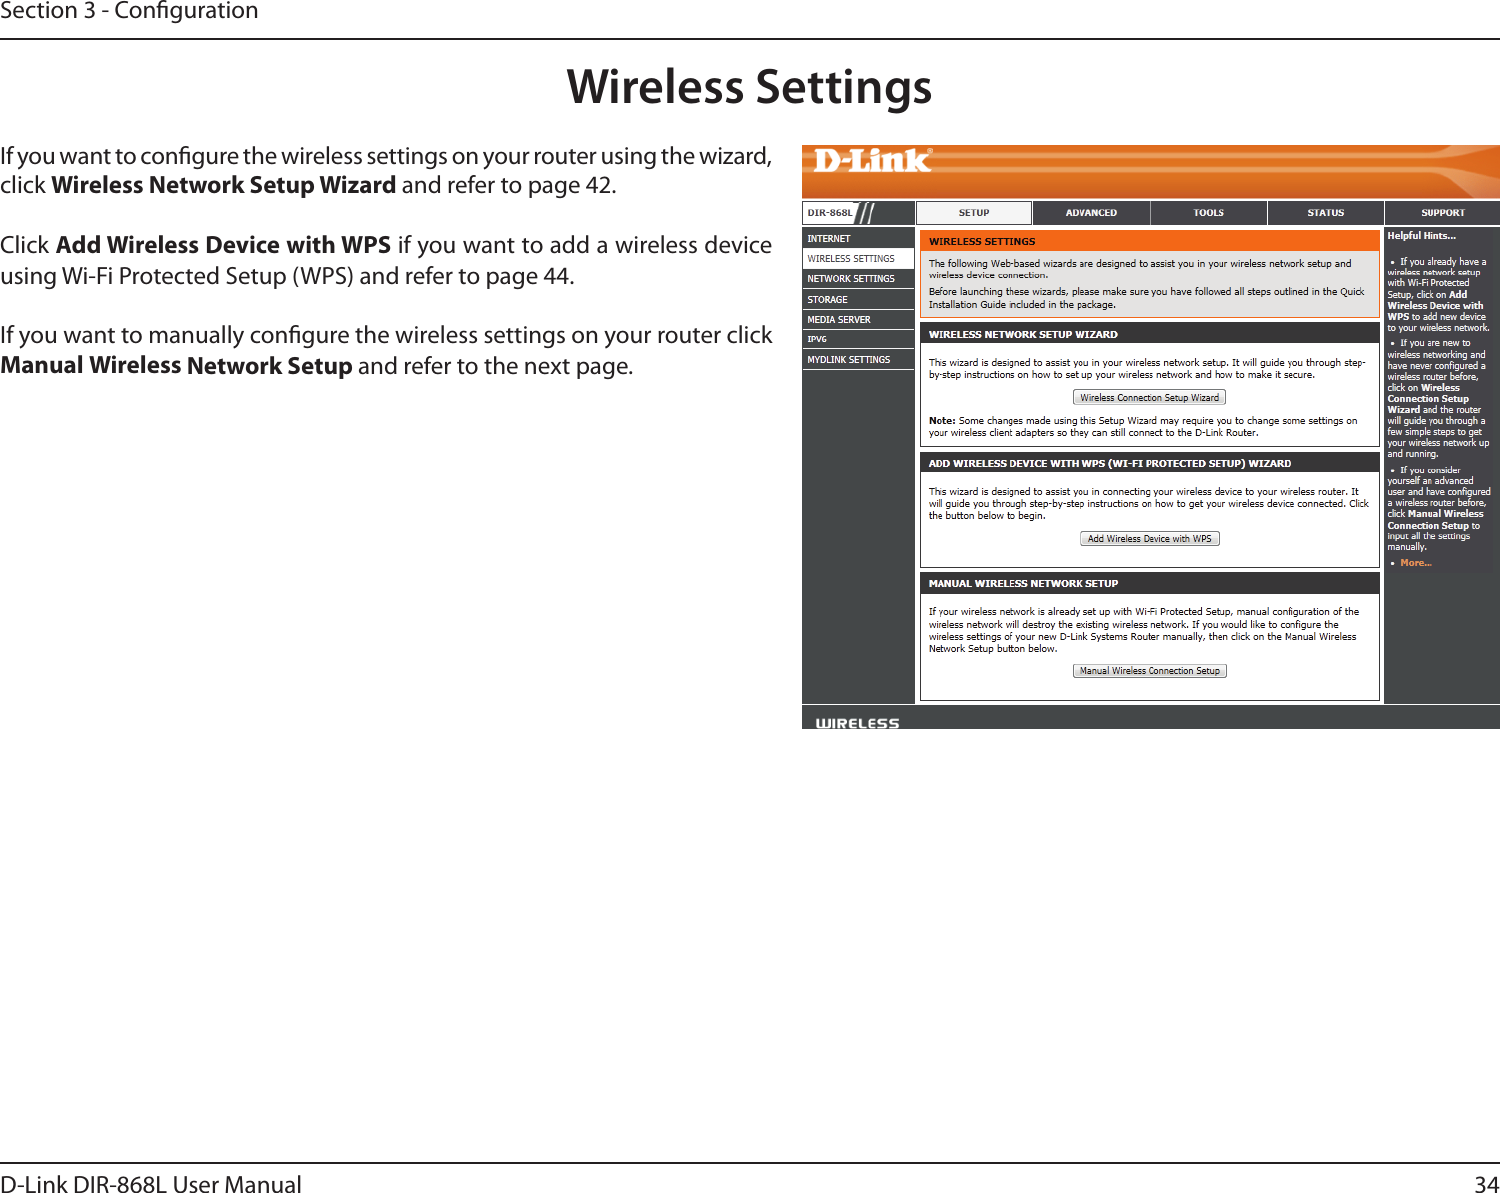 34D-Link DIR-868L User ManualSection 3 - CongurationWireless SettingsIf you want to congure the wireless settings on your router using the wizard, click Wireless Network Setup Wizard and refer to page 42.Click Add Wireless Device with WPS if you want to add a wireless device using Wi-Fi Protected Setup (WPS) and refer to page 44.If you want to manually congure the wireless settings on your router click Manual Wireless Network Setup and refer to the next page.